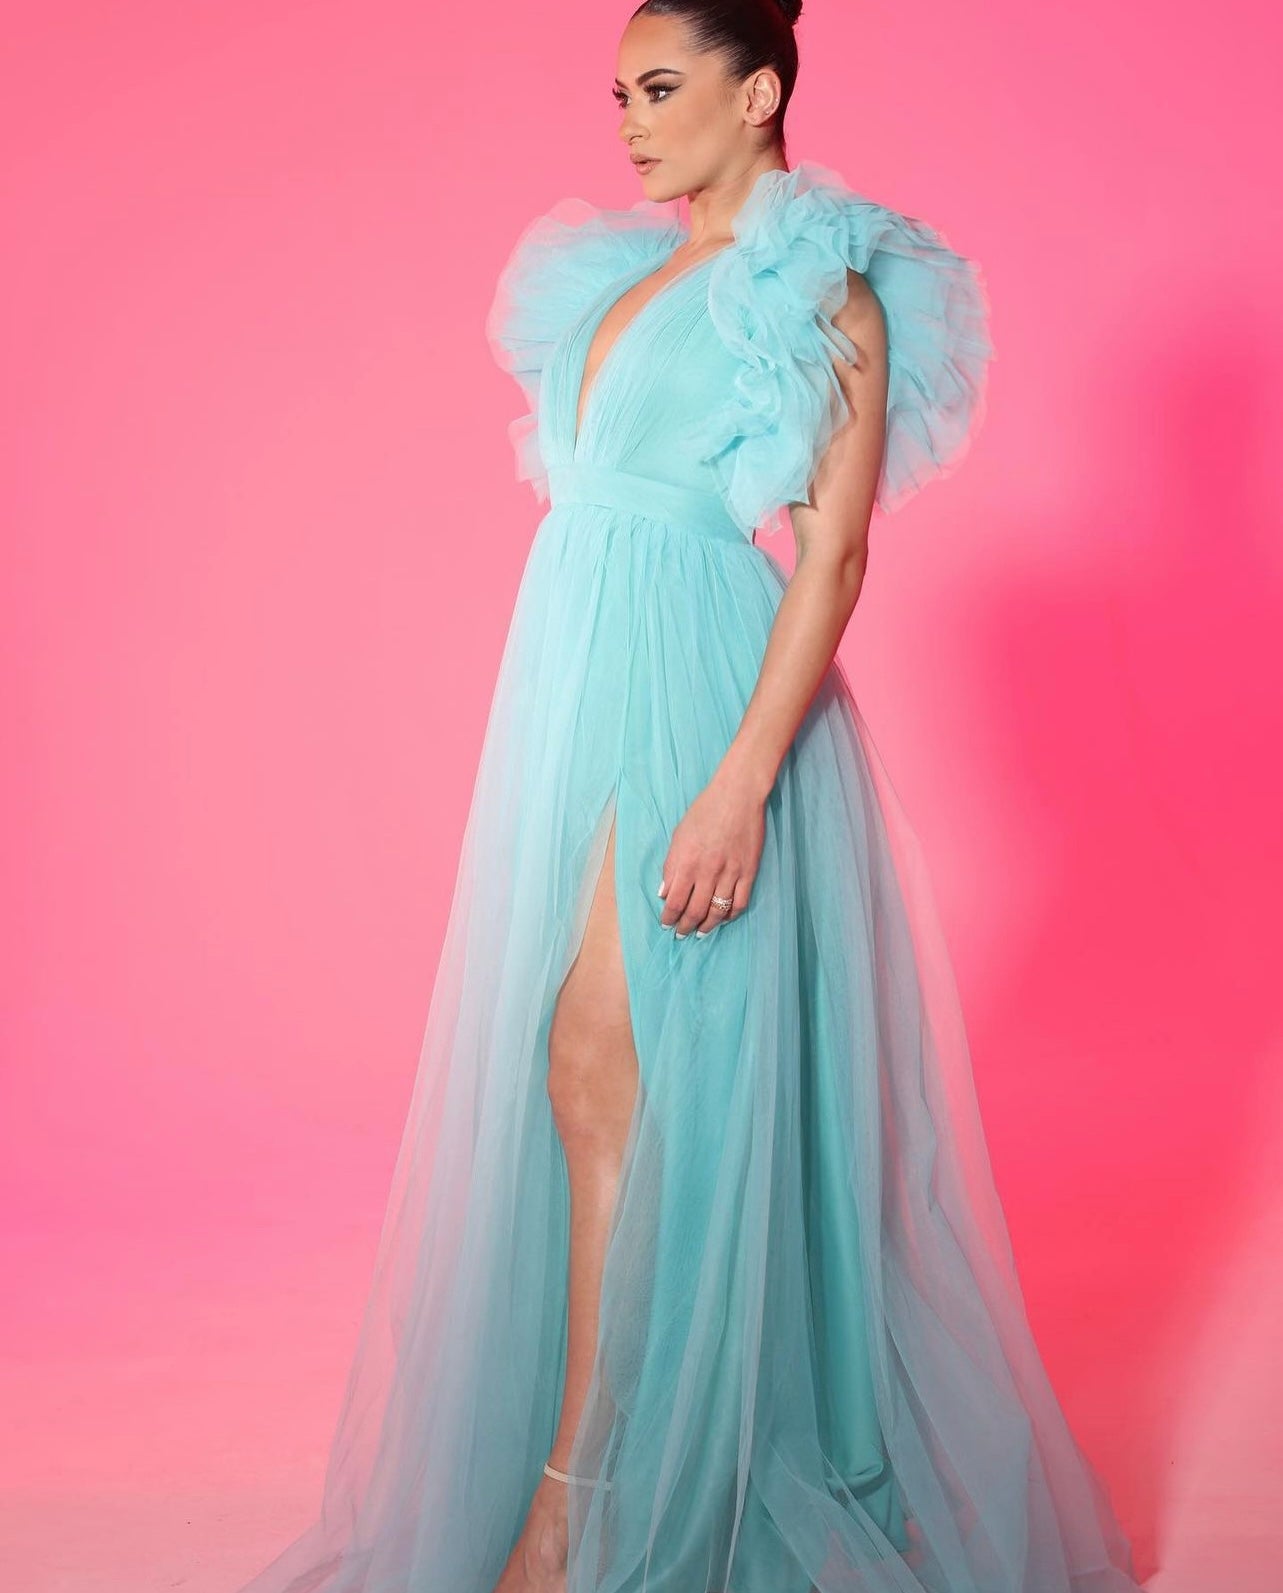 Bury Me in Tulle Gown in Tiffany Blue